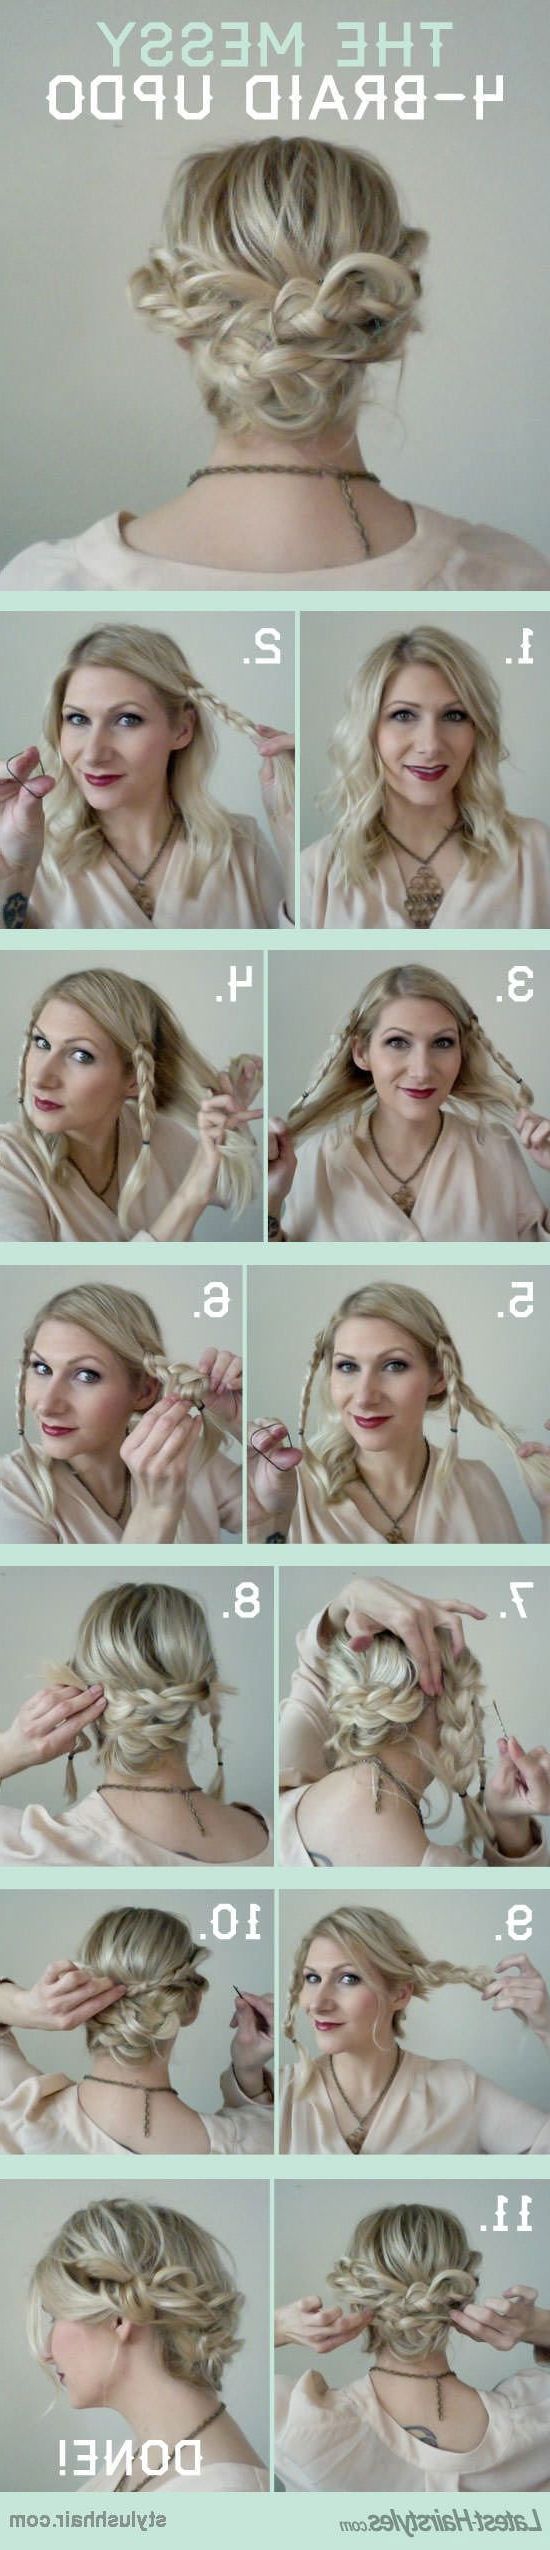 15 Cute And Easy Hairstyle Tutorials For Medium Length Hair – Gurl For Messy Updos For Medium Length Hair (View 15 of 15)